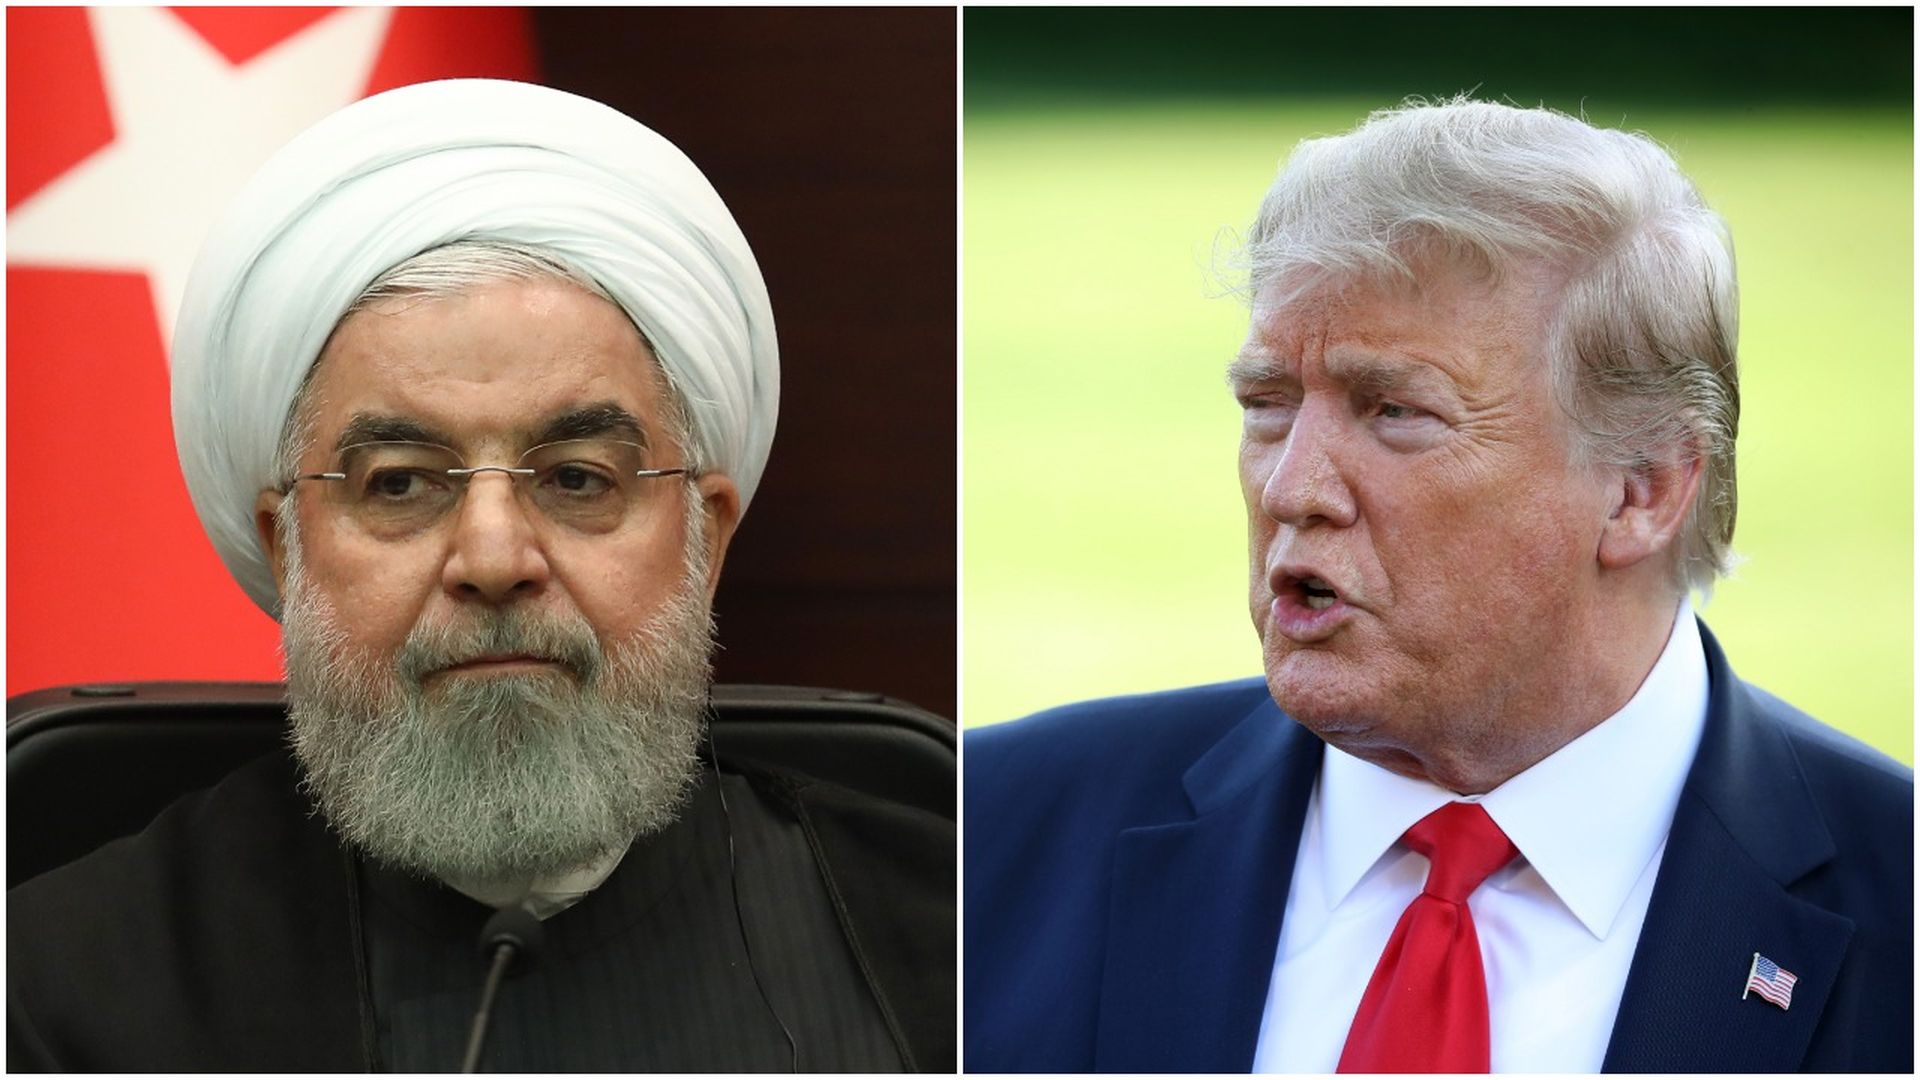 Collage of Iranian President Hassan Rouhani and President Trump 